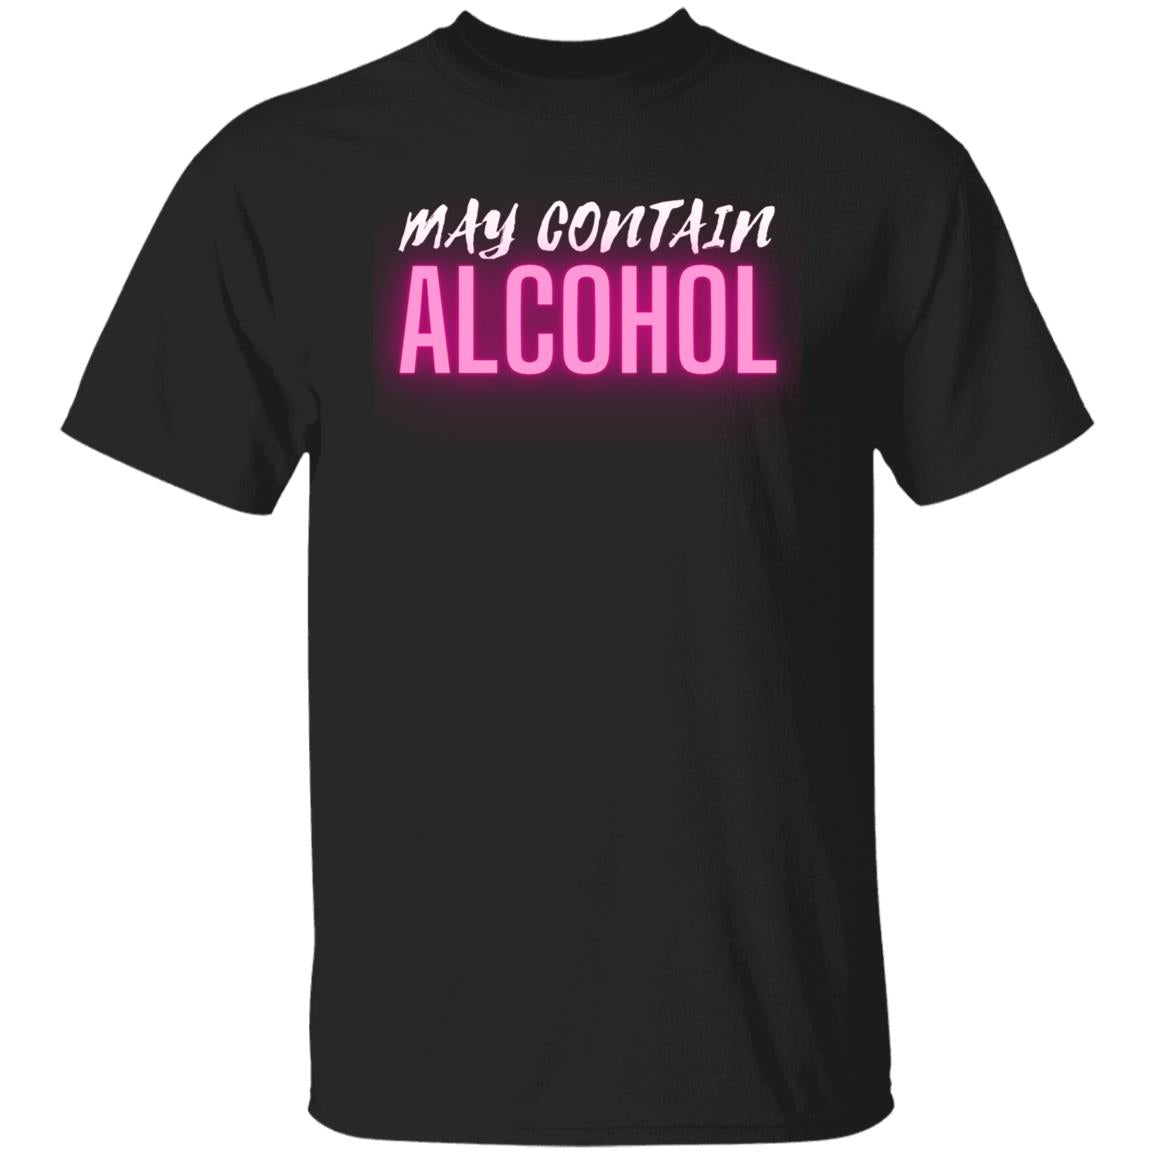 May Contain Alcohol Drinking Party Humor Shirt